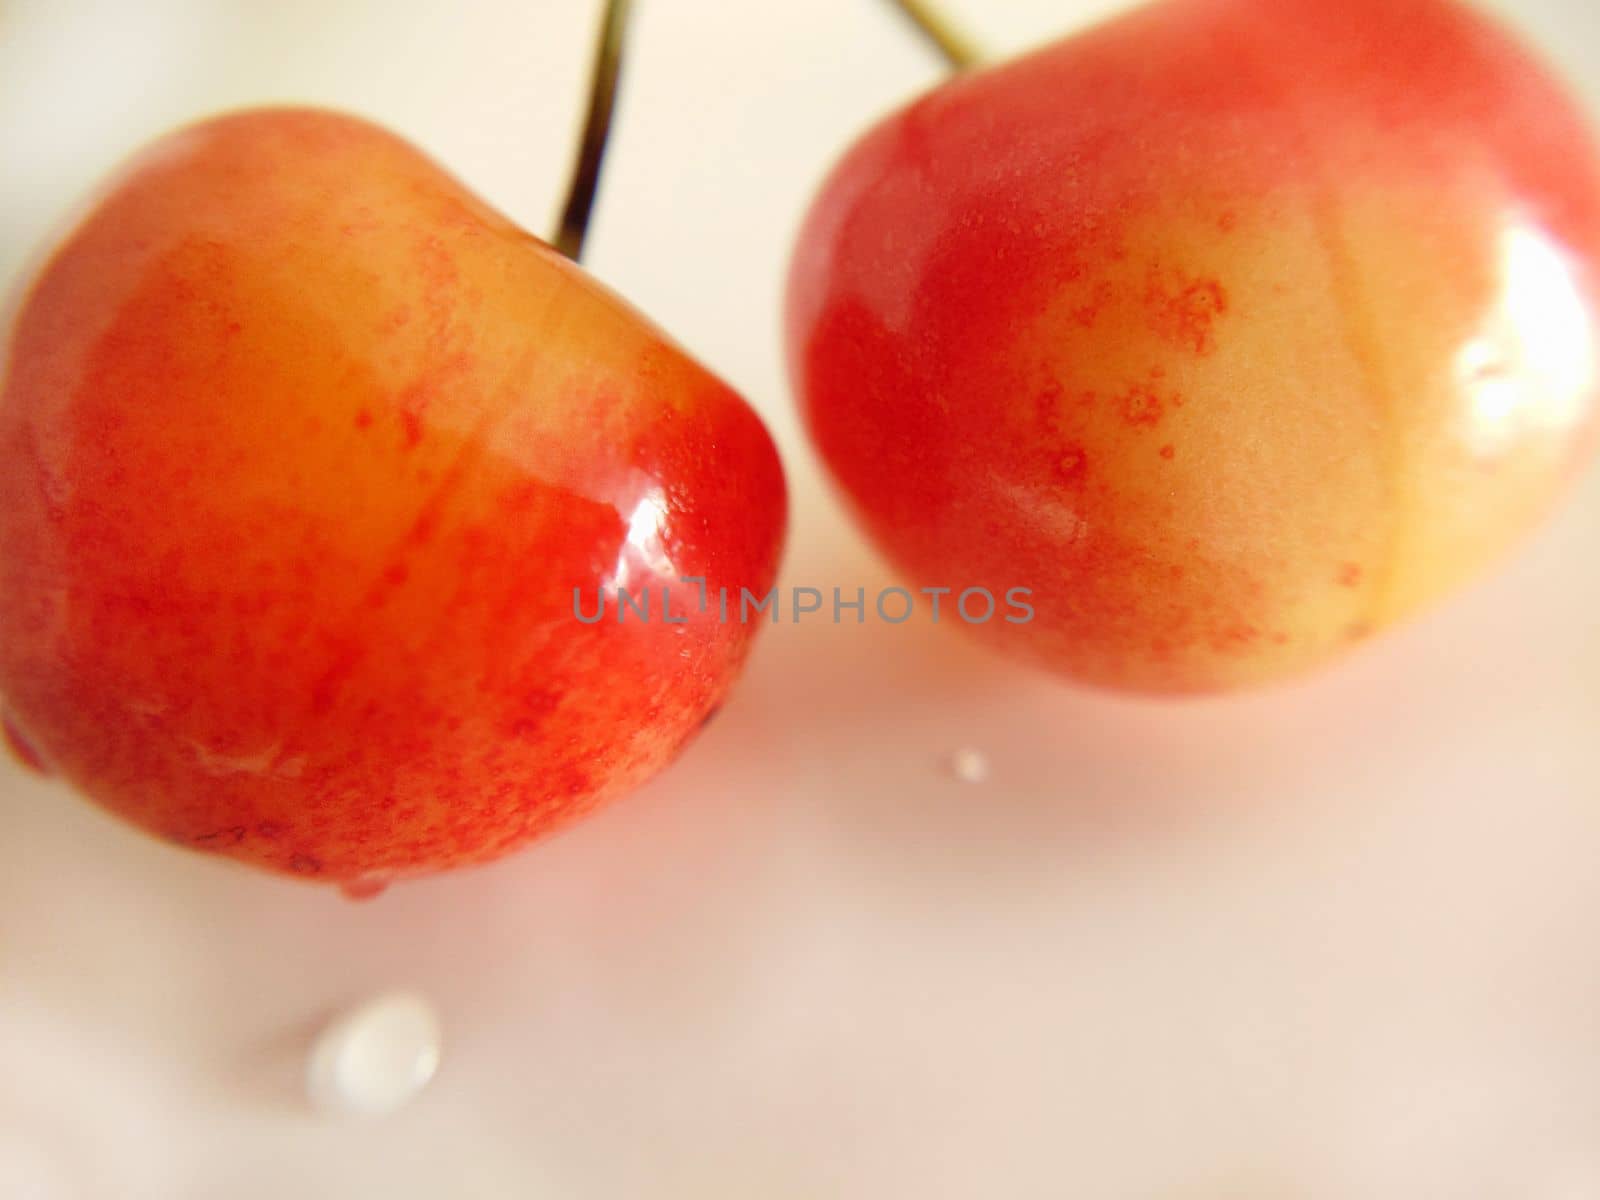 Background image of two yellow-red cherries in close-up by Mastak80